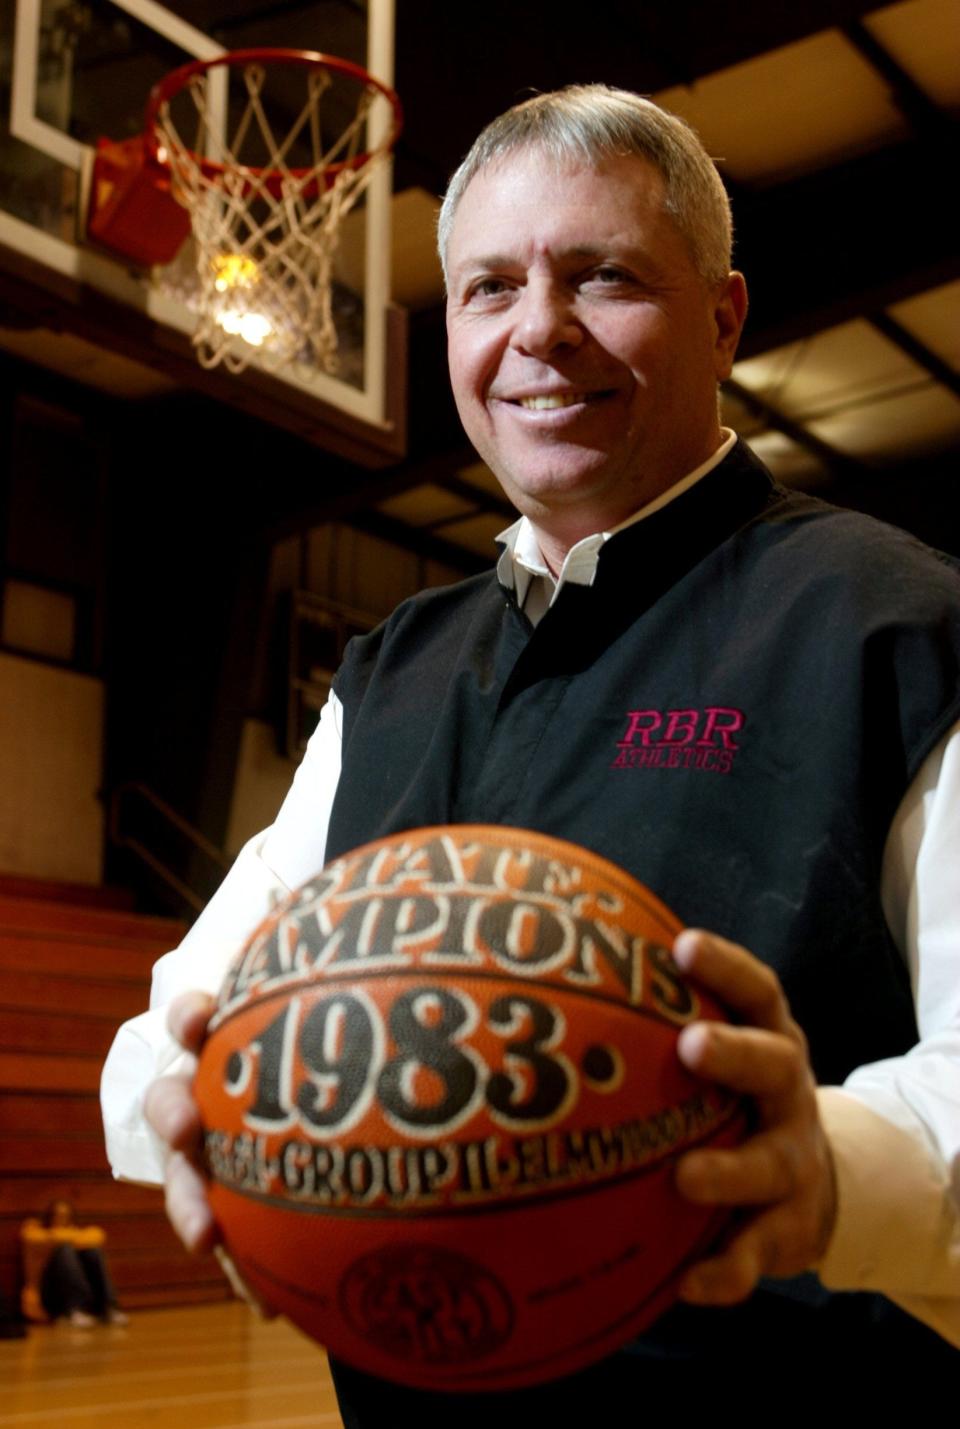 Former Red Bank coach Nick Pizzulli, shown in a 2003 photo, displays a ball from Red Bank's unbeaten 1983 NJSIAA Group 2 championship team.